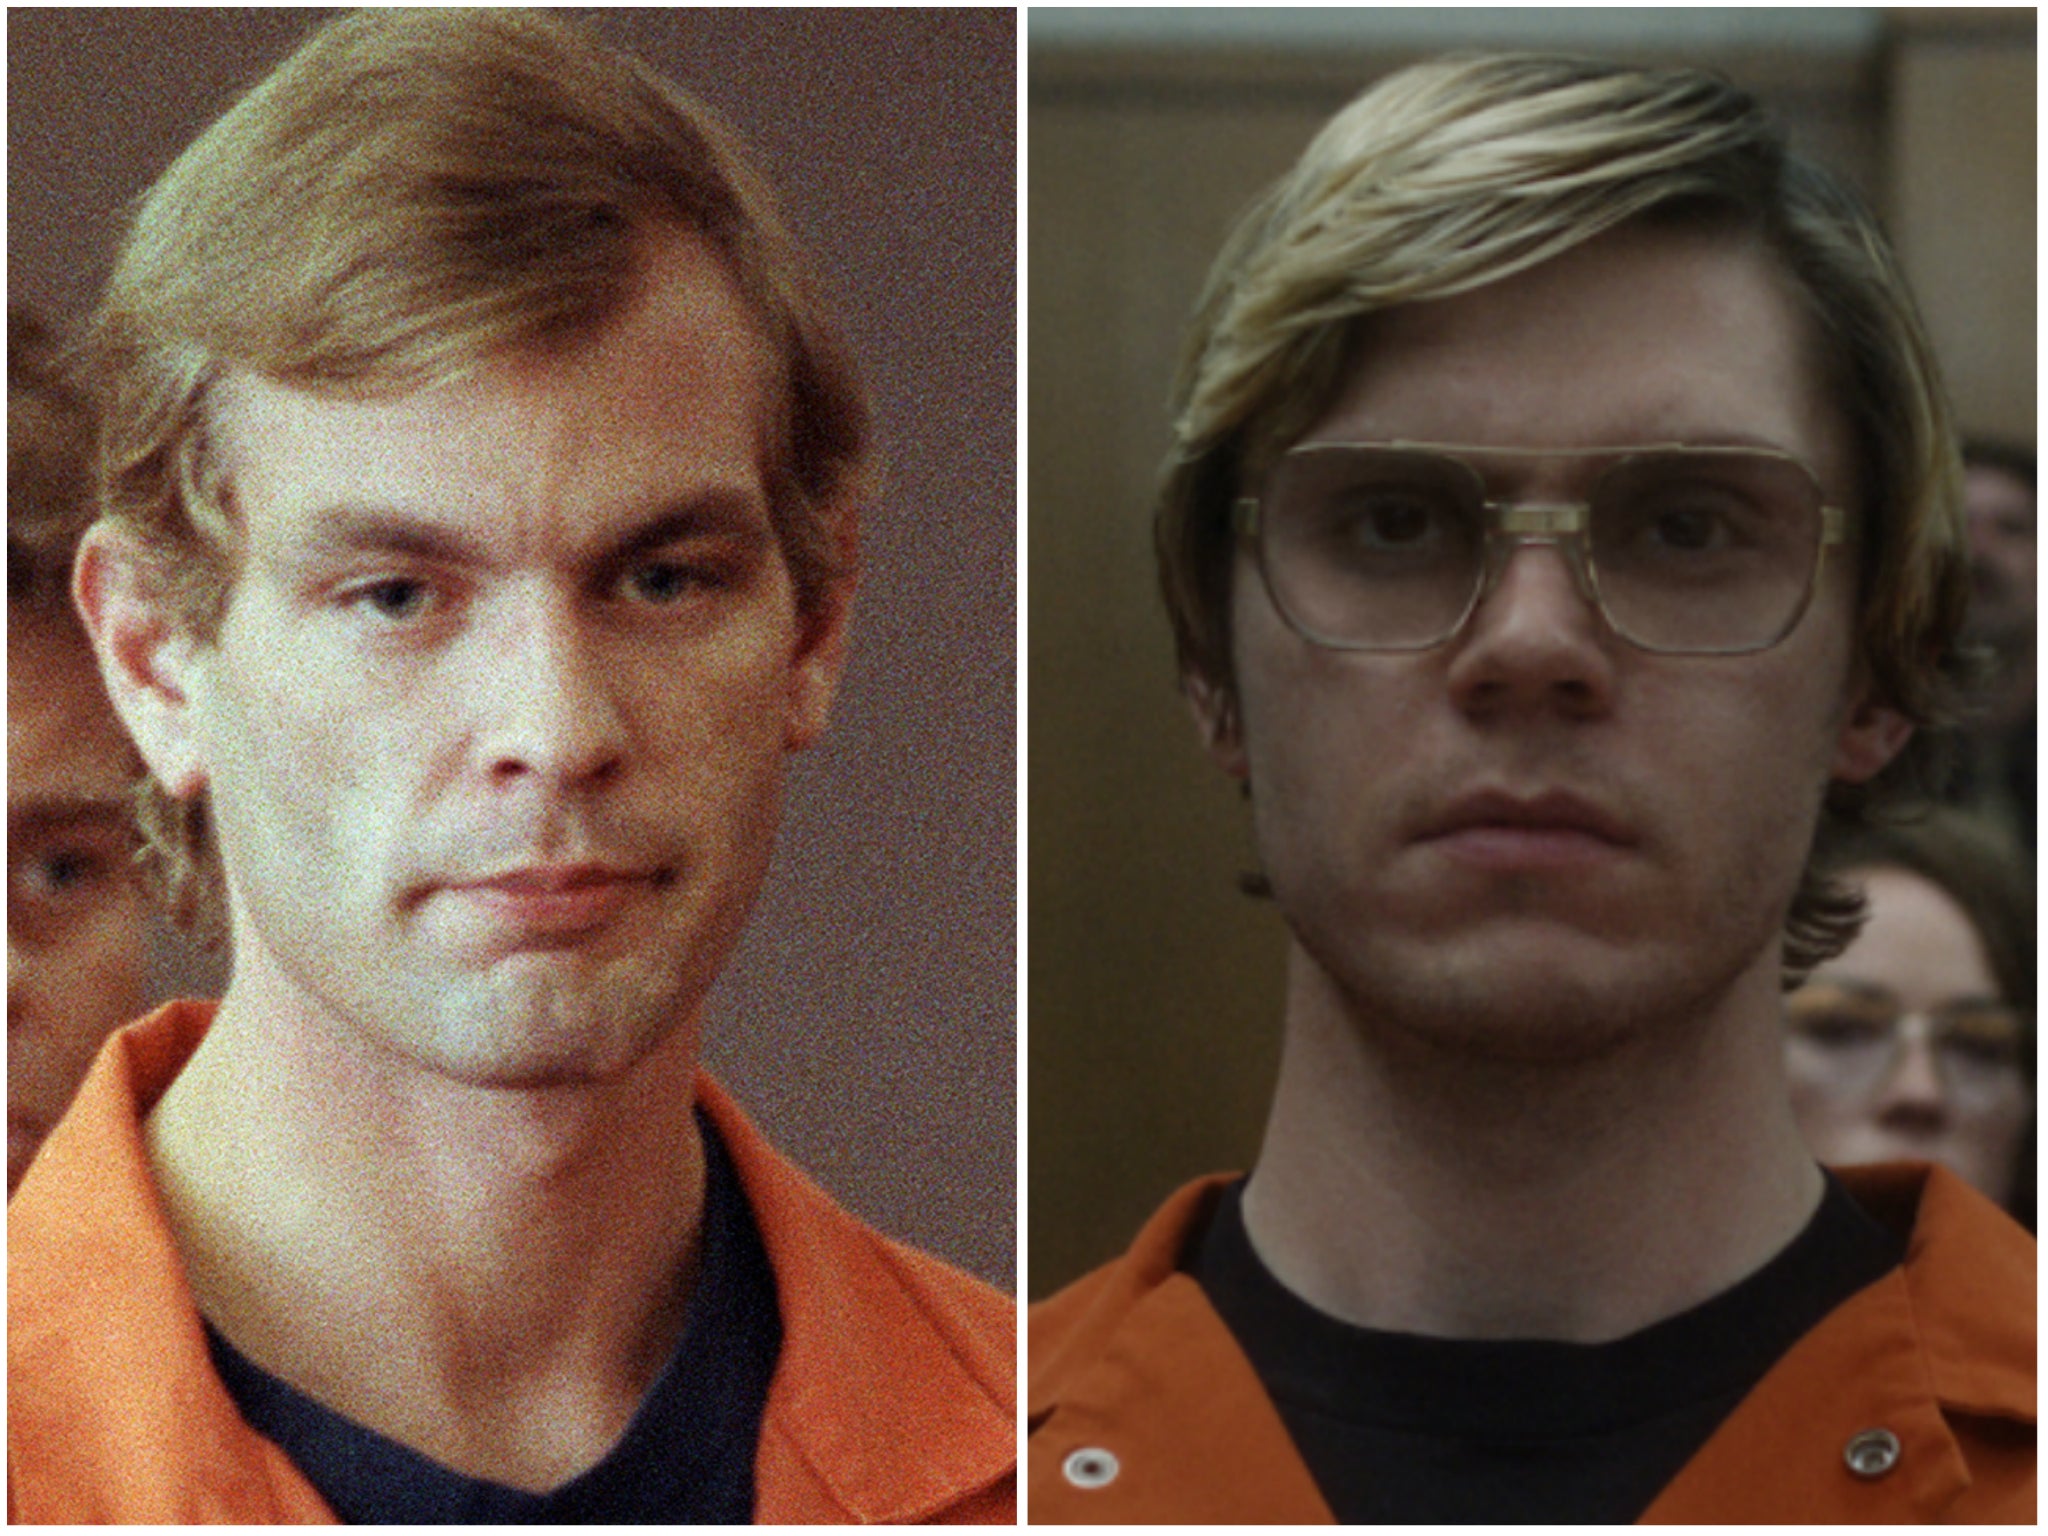 Pics Of Jeffrey Dahmer Jeffrey Dahmer: Netflix's 'exploitative' new series is reopening victims'  wounds 30 years later | The Independent